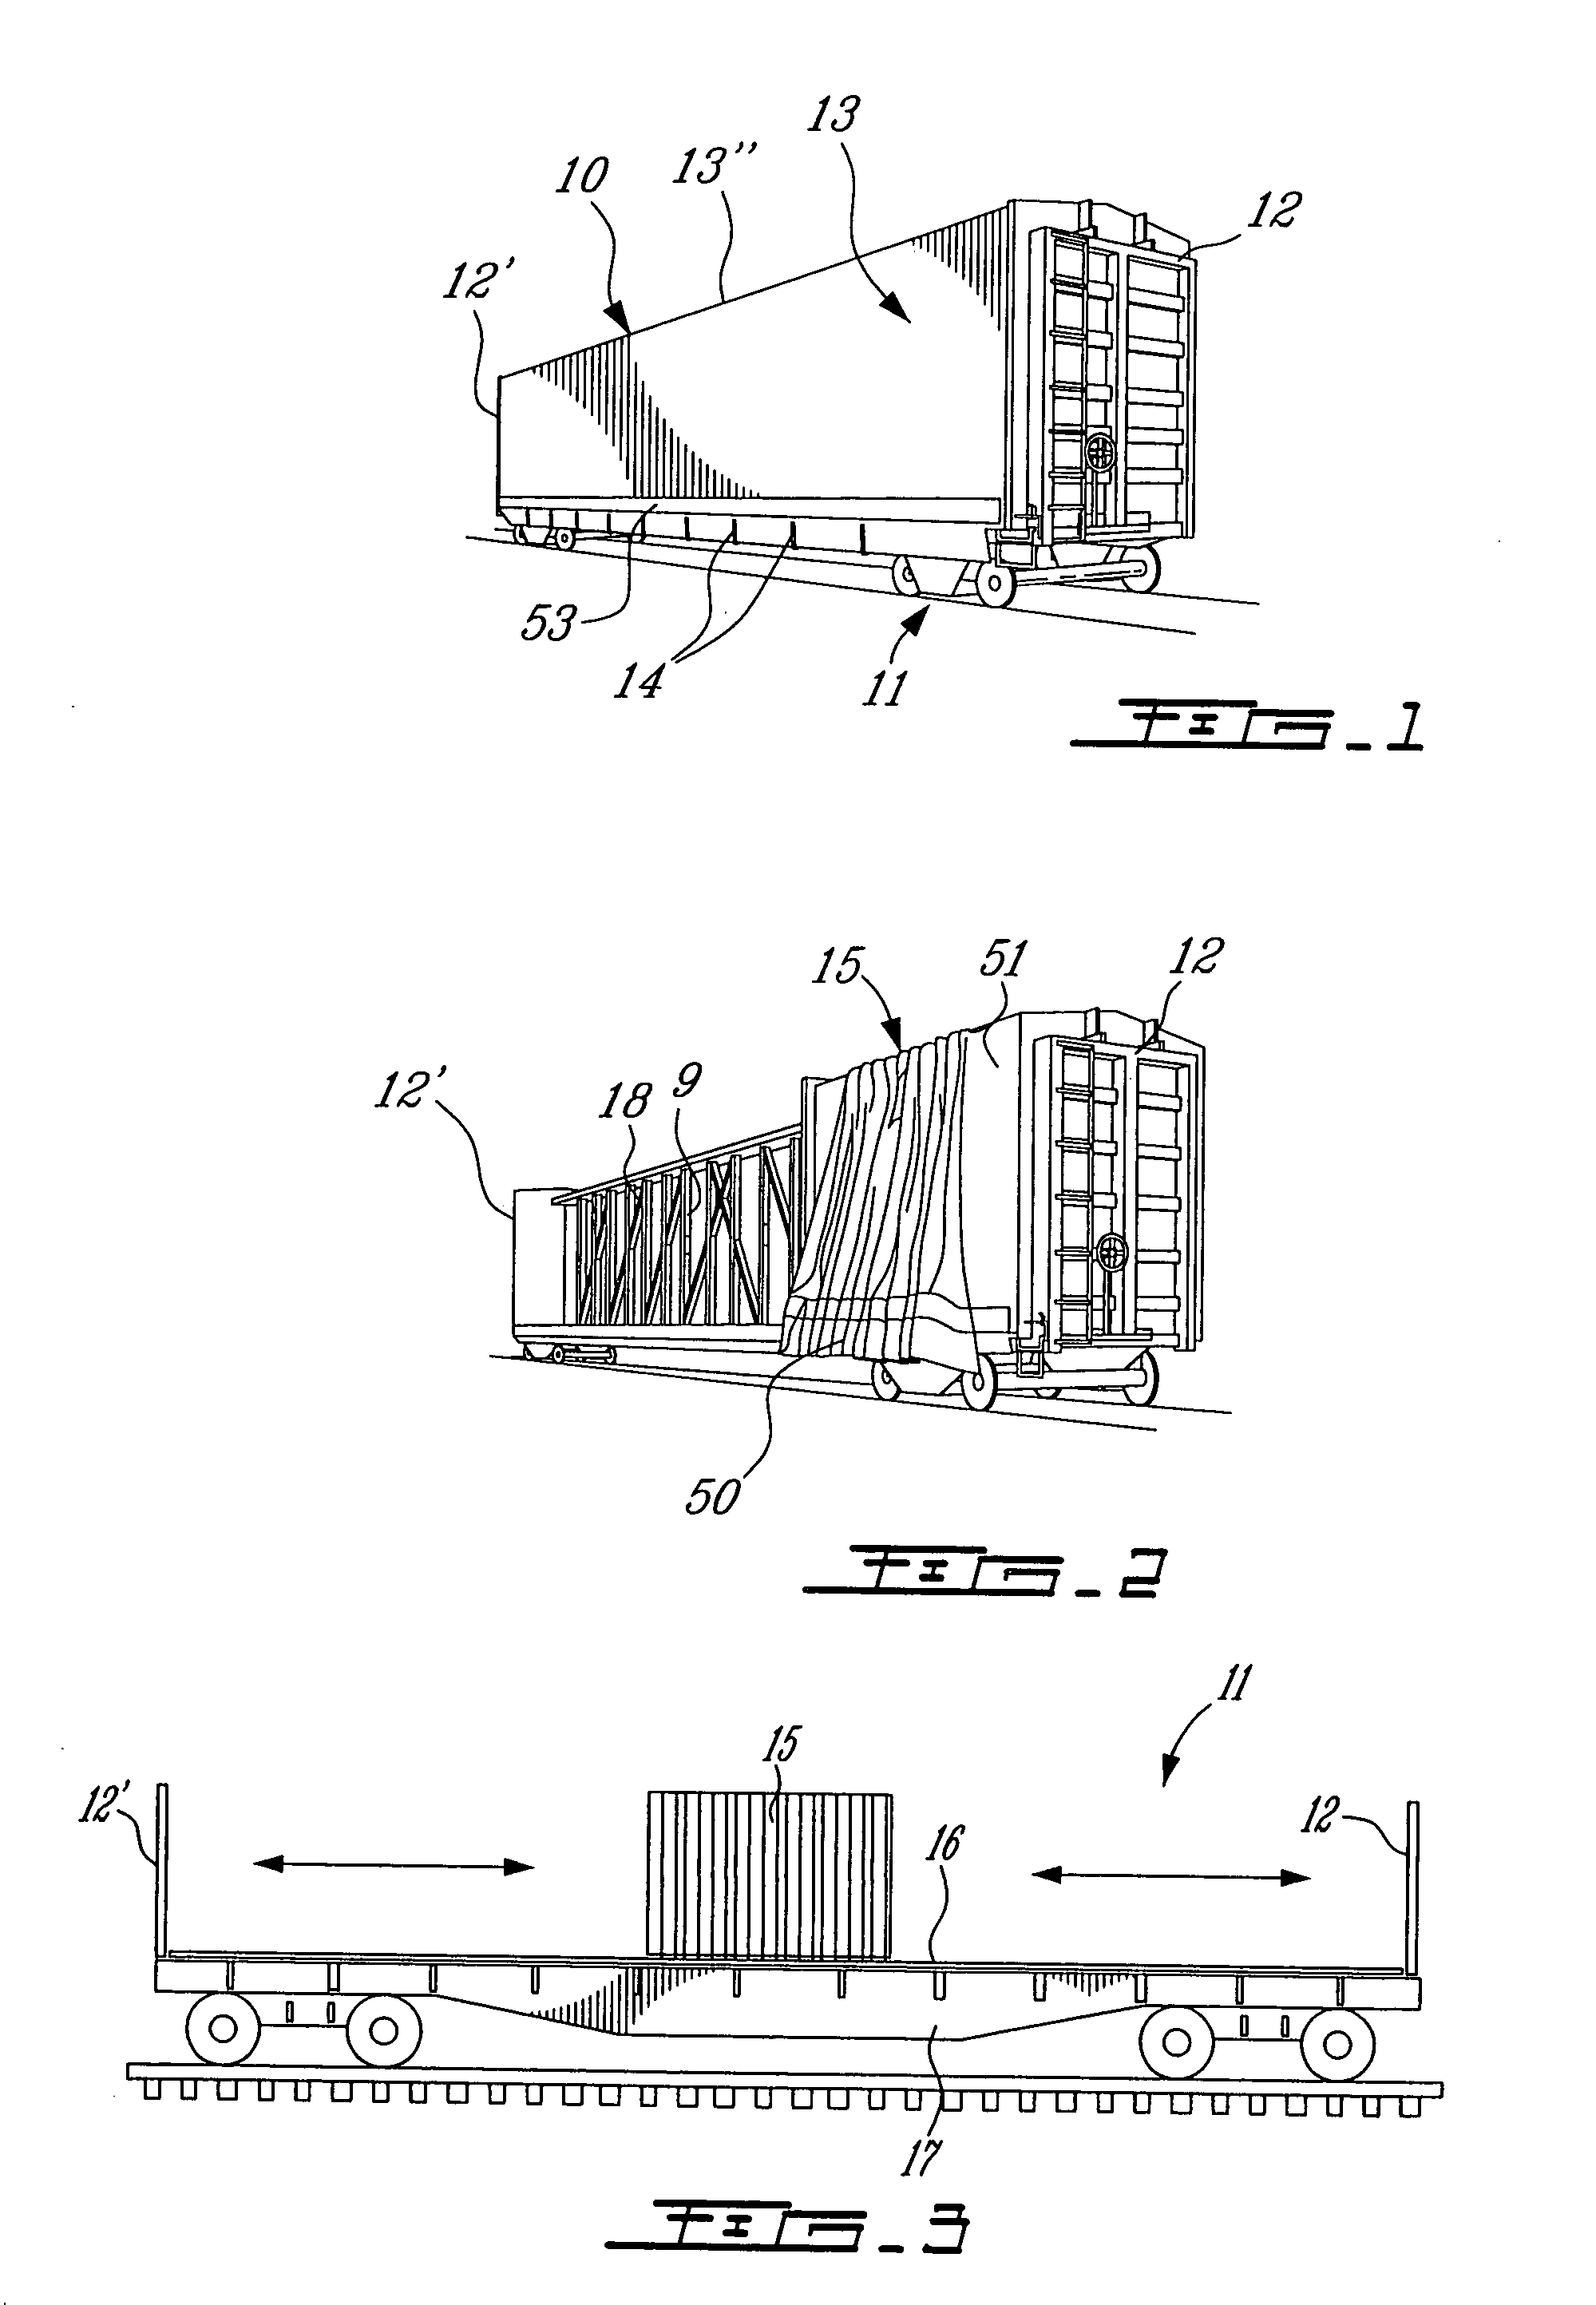 Slidable cover assembly for merchandise carrying vehicle platforms